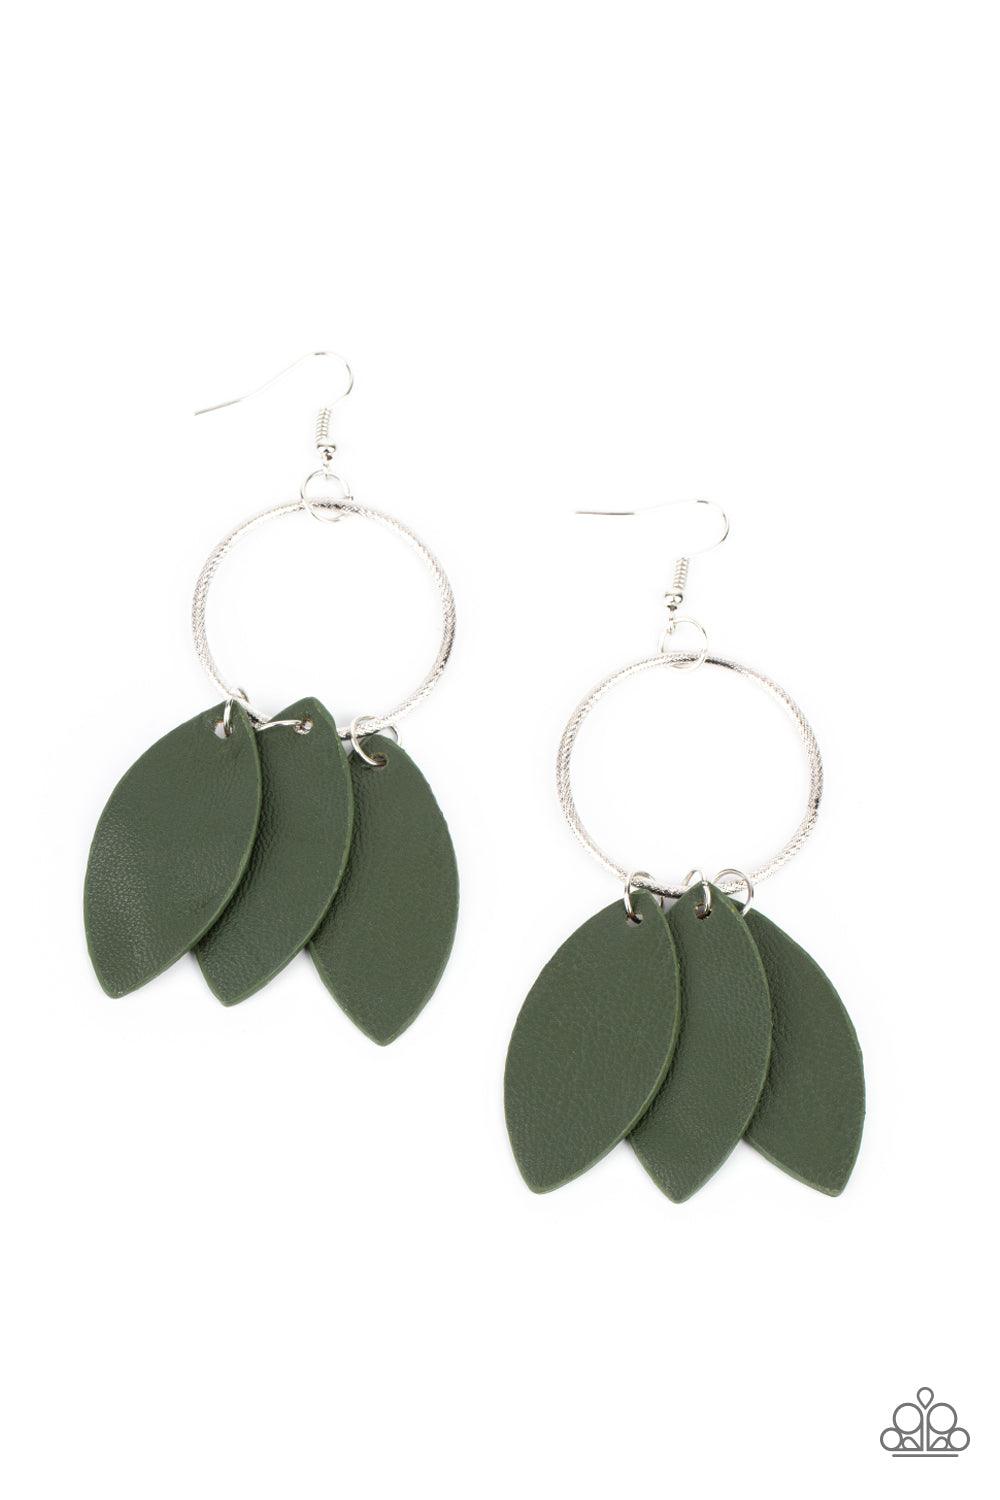 Paparazzi Accessories Leafy Laguna - Green Leafy green leather frames swing from the bottom of a textured silver hoop, creating an earthy fringe. Earring attaches to a standard fishhook fitting. Sold as one pair of earrings. Jewelry